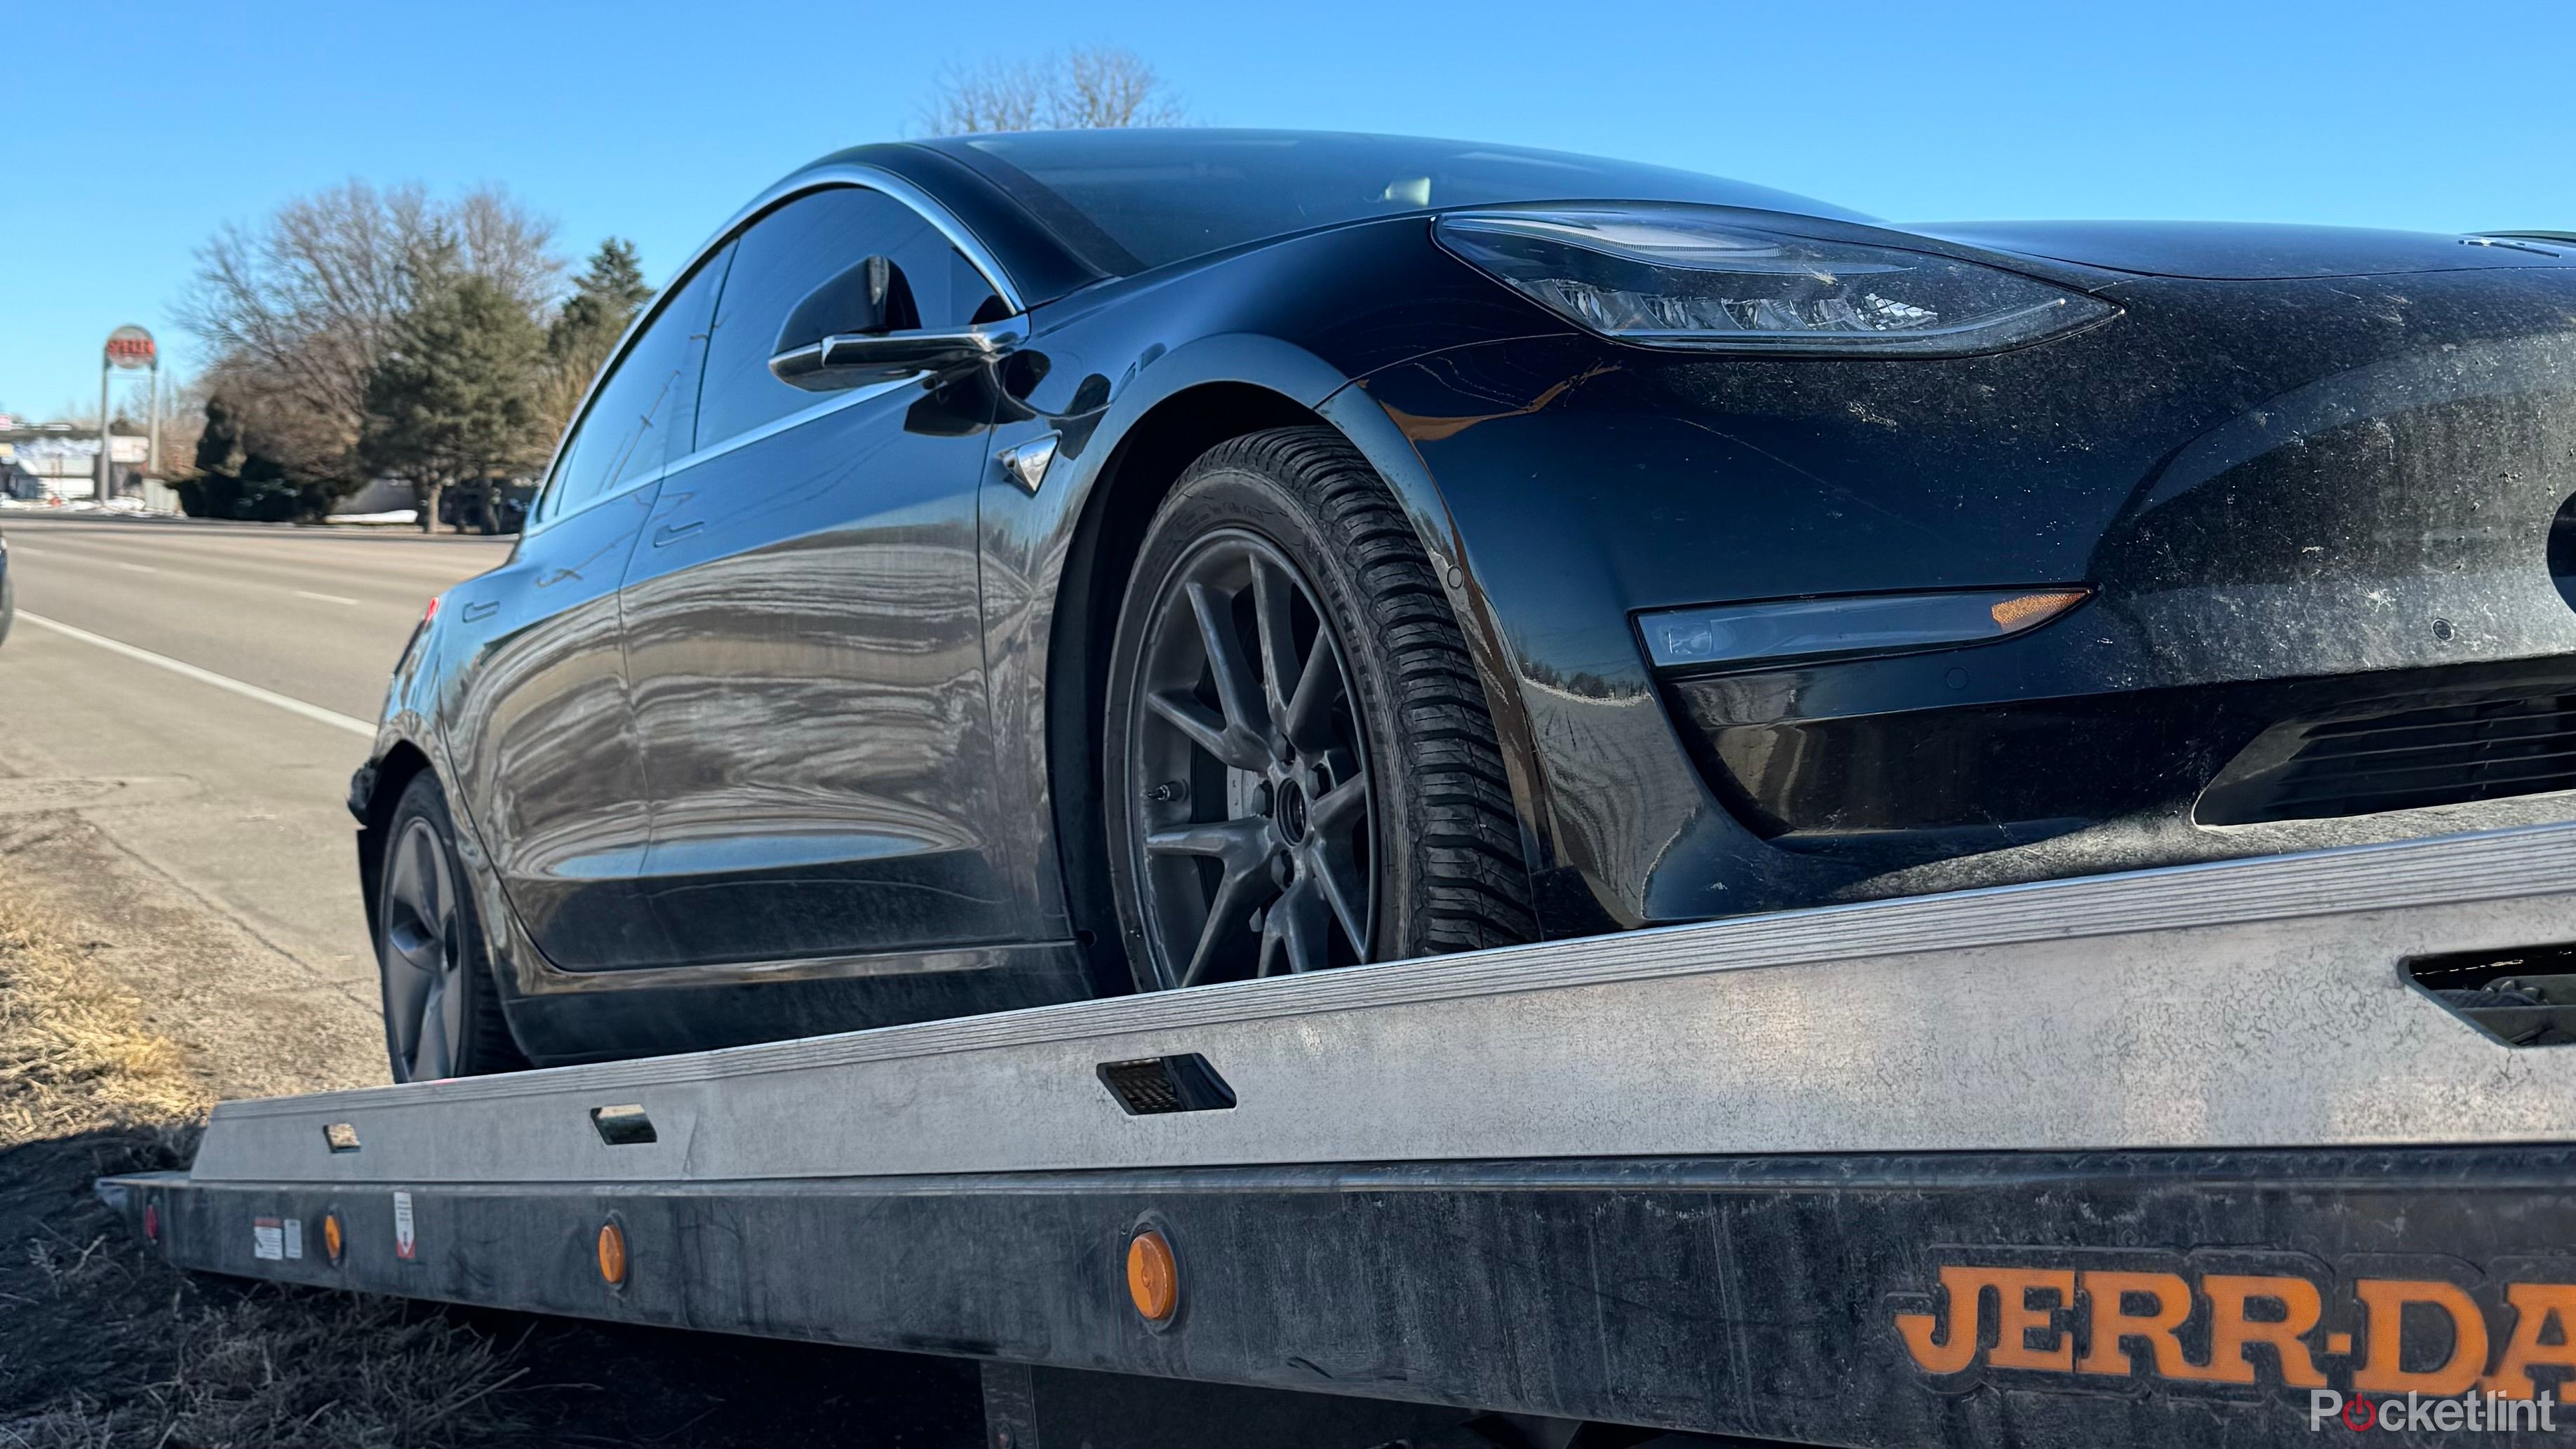 A Tesla on a tow truck